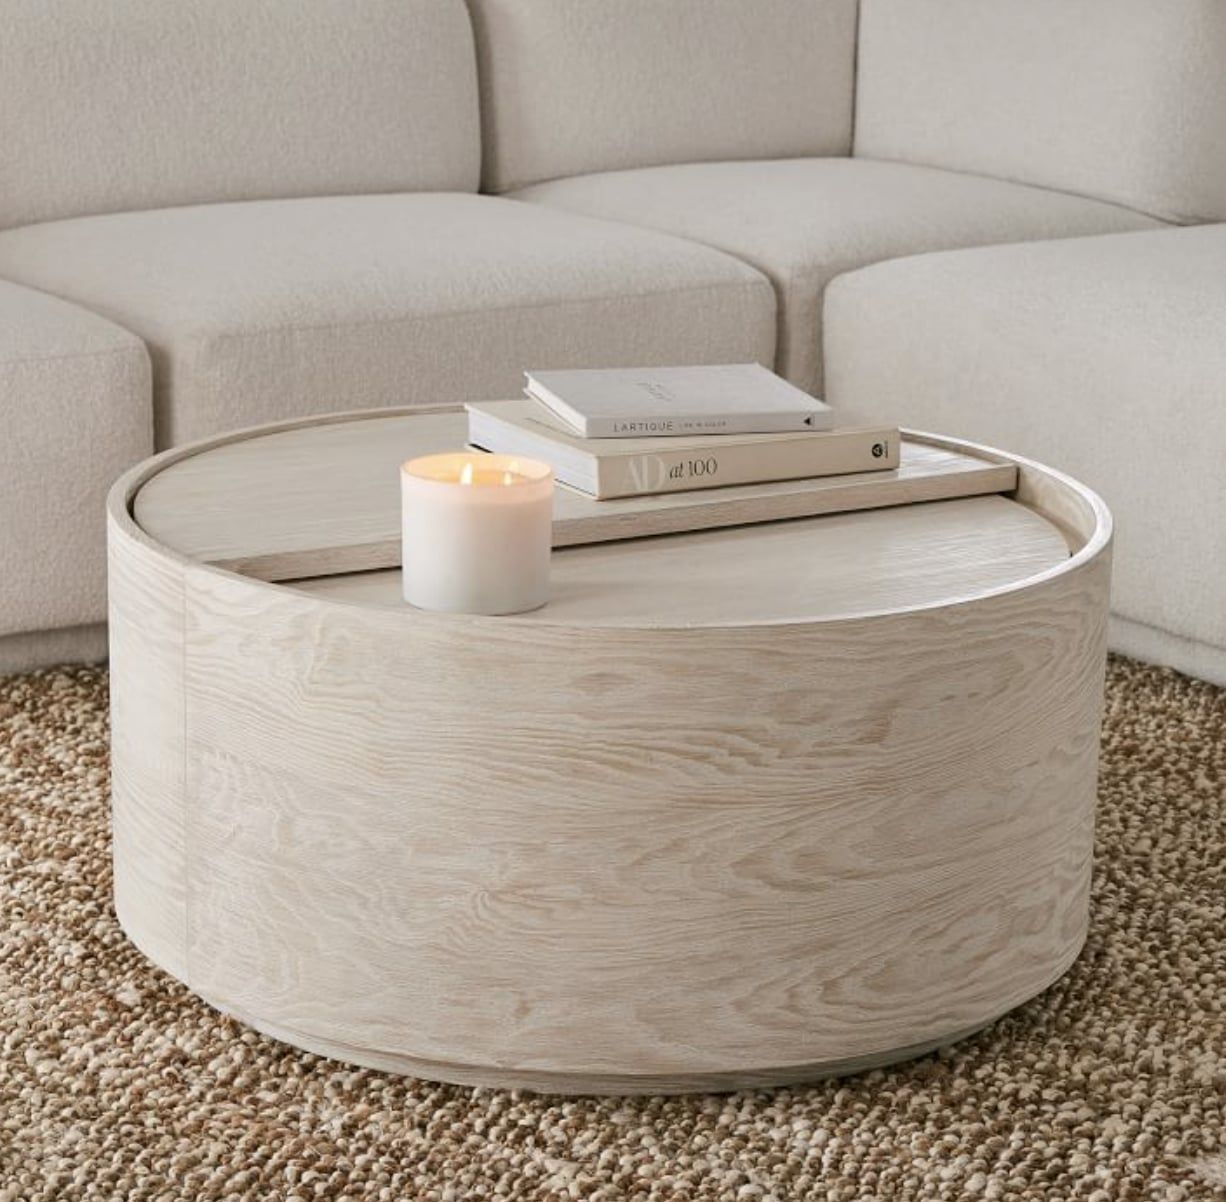 Best Coffee Tables With Storage Space 2022 | Popsugar Home For Contemporary Coffee Tables With Shelf (View 8 of 15)